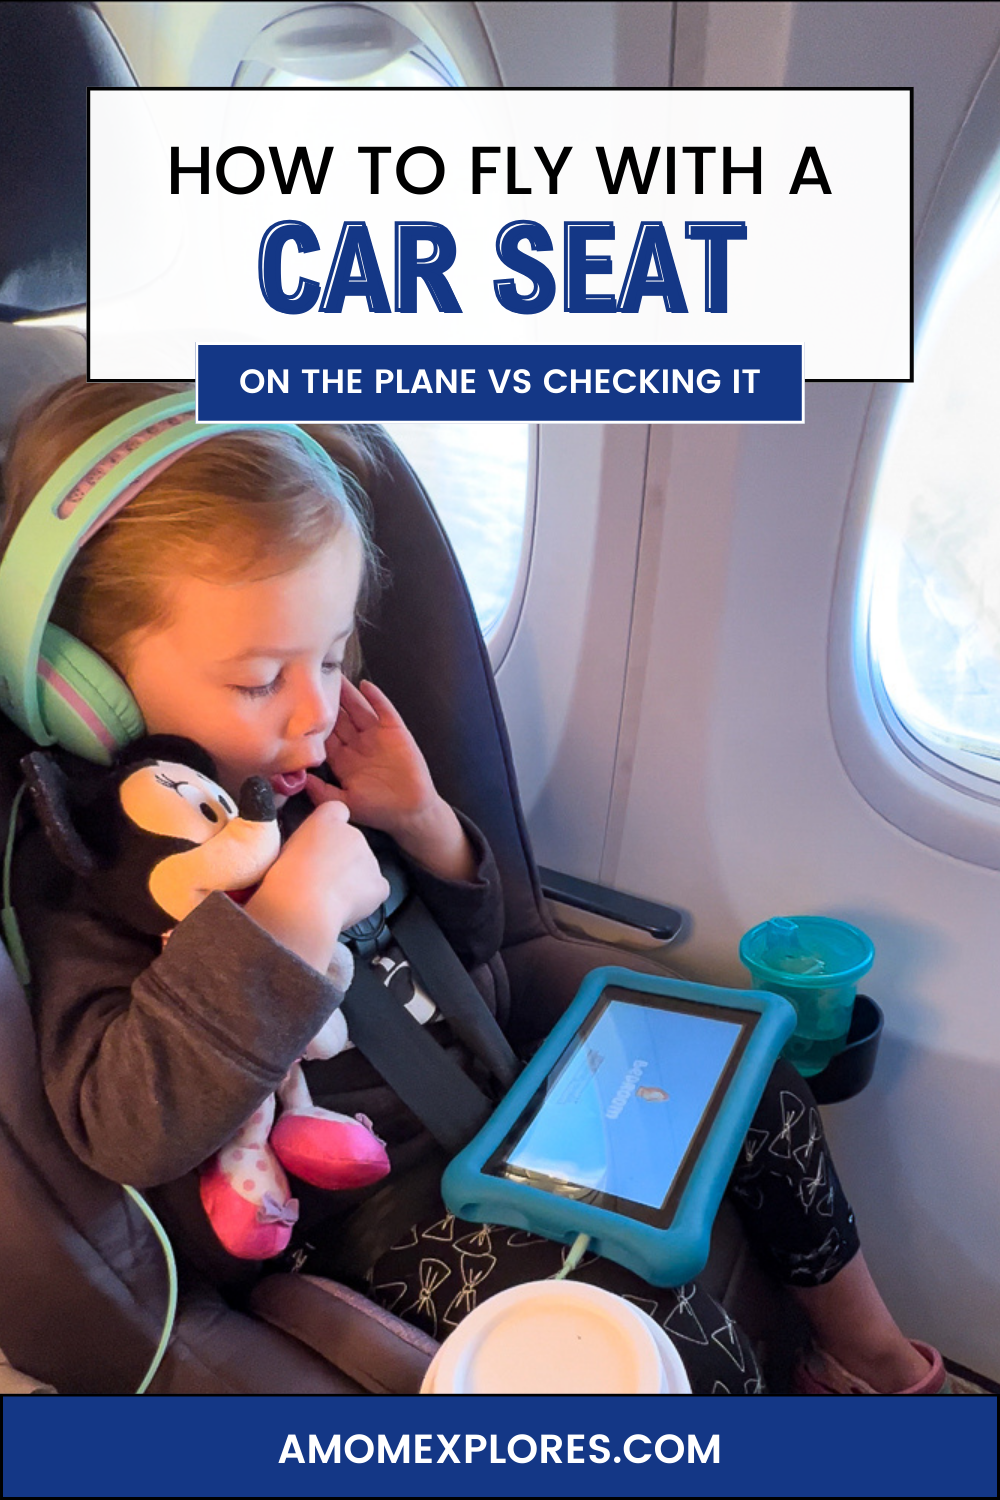 HOW TO FLY with a car seat (checking the car seat vs bringing it on the plane).png